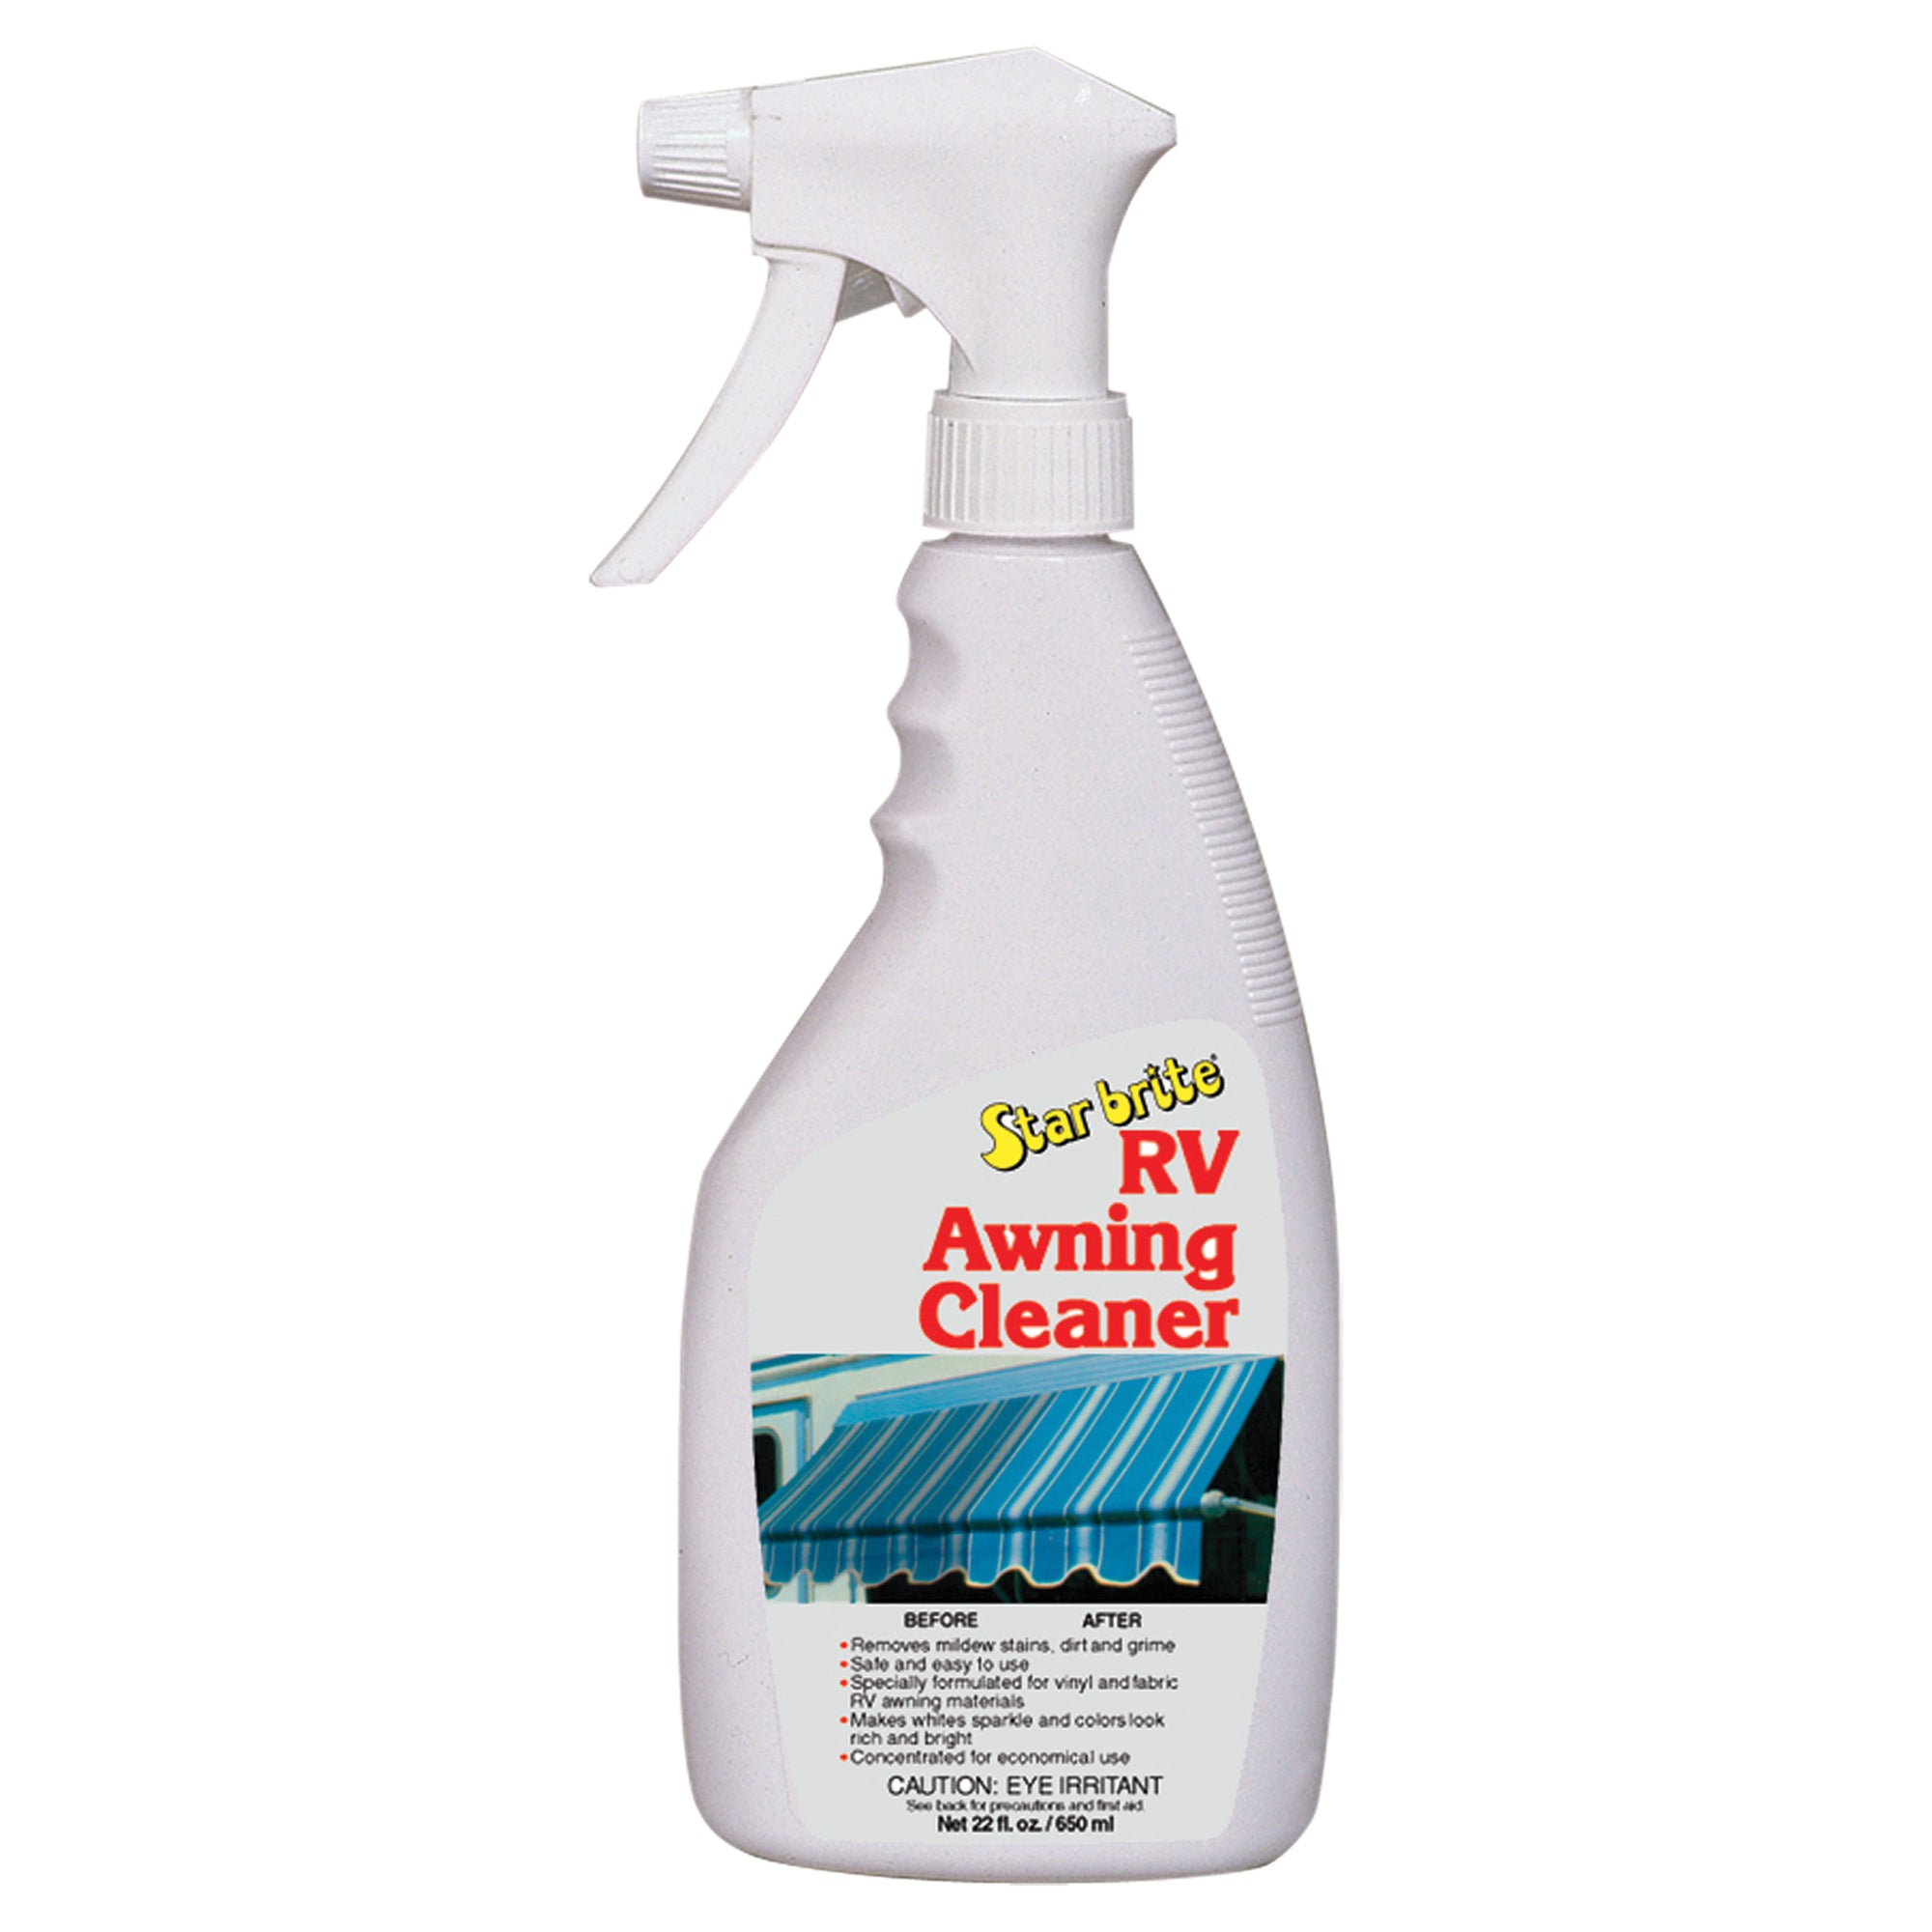 Star brite 071332 RV Awning Cleaner and Protectant